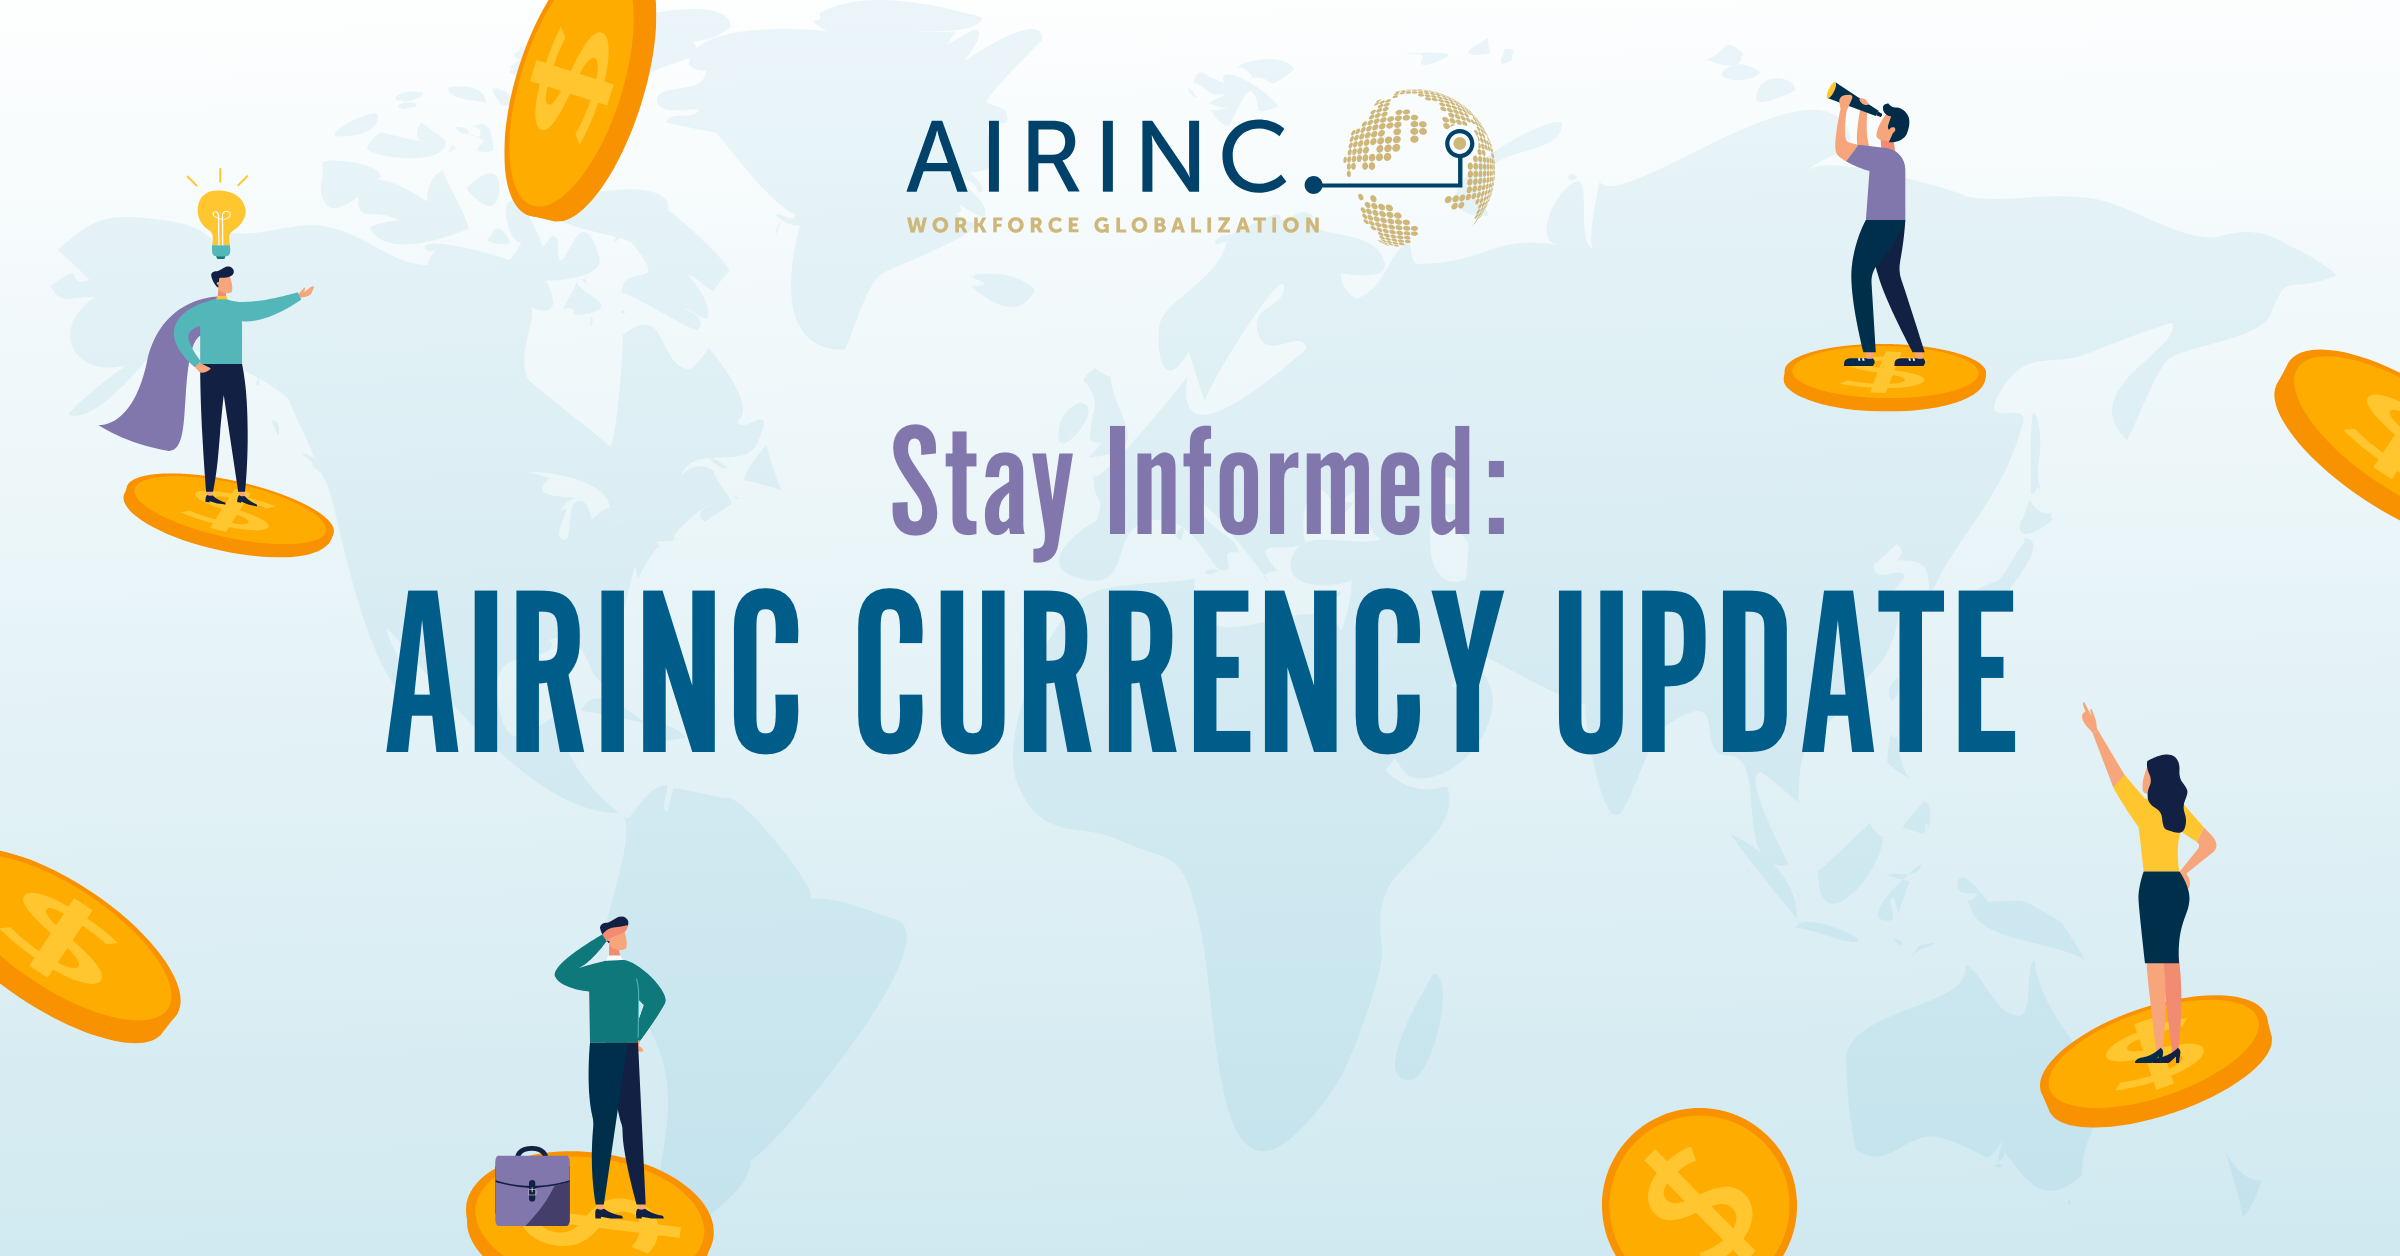 stay informed with AIRINC's currency update showing pictures of currencies around the world